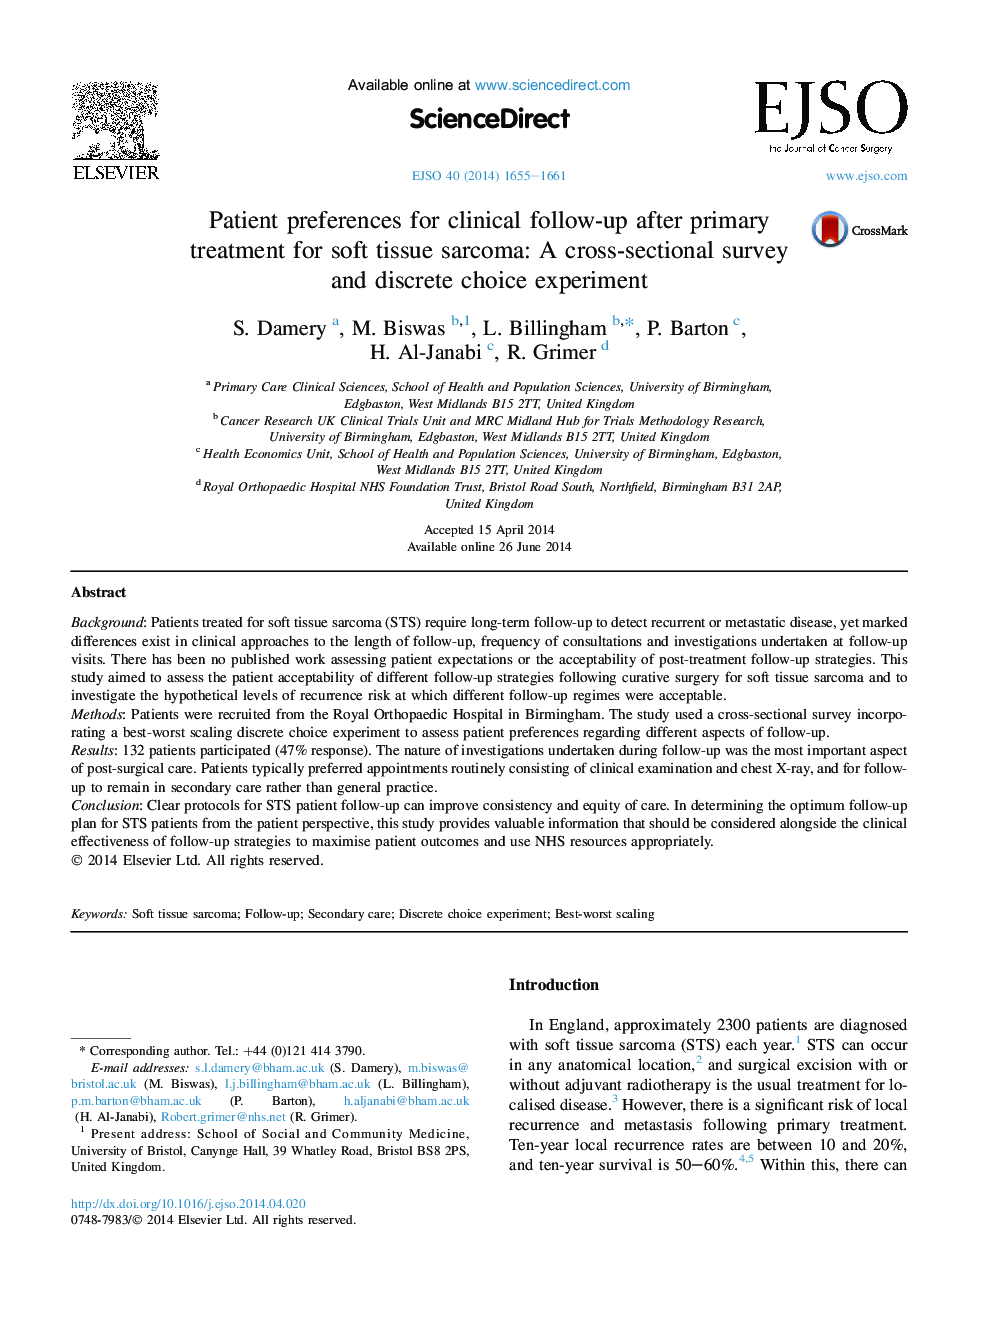 Patient preferences for clinical follow-up after primary treatment for soft tissue sarcoma: A cross-sectional survey and discrete choice experiment